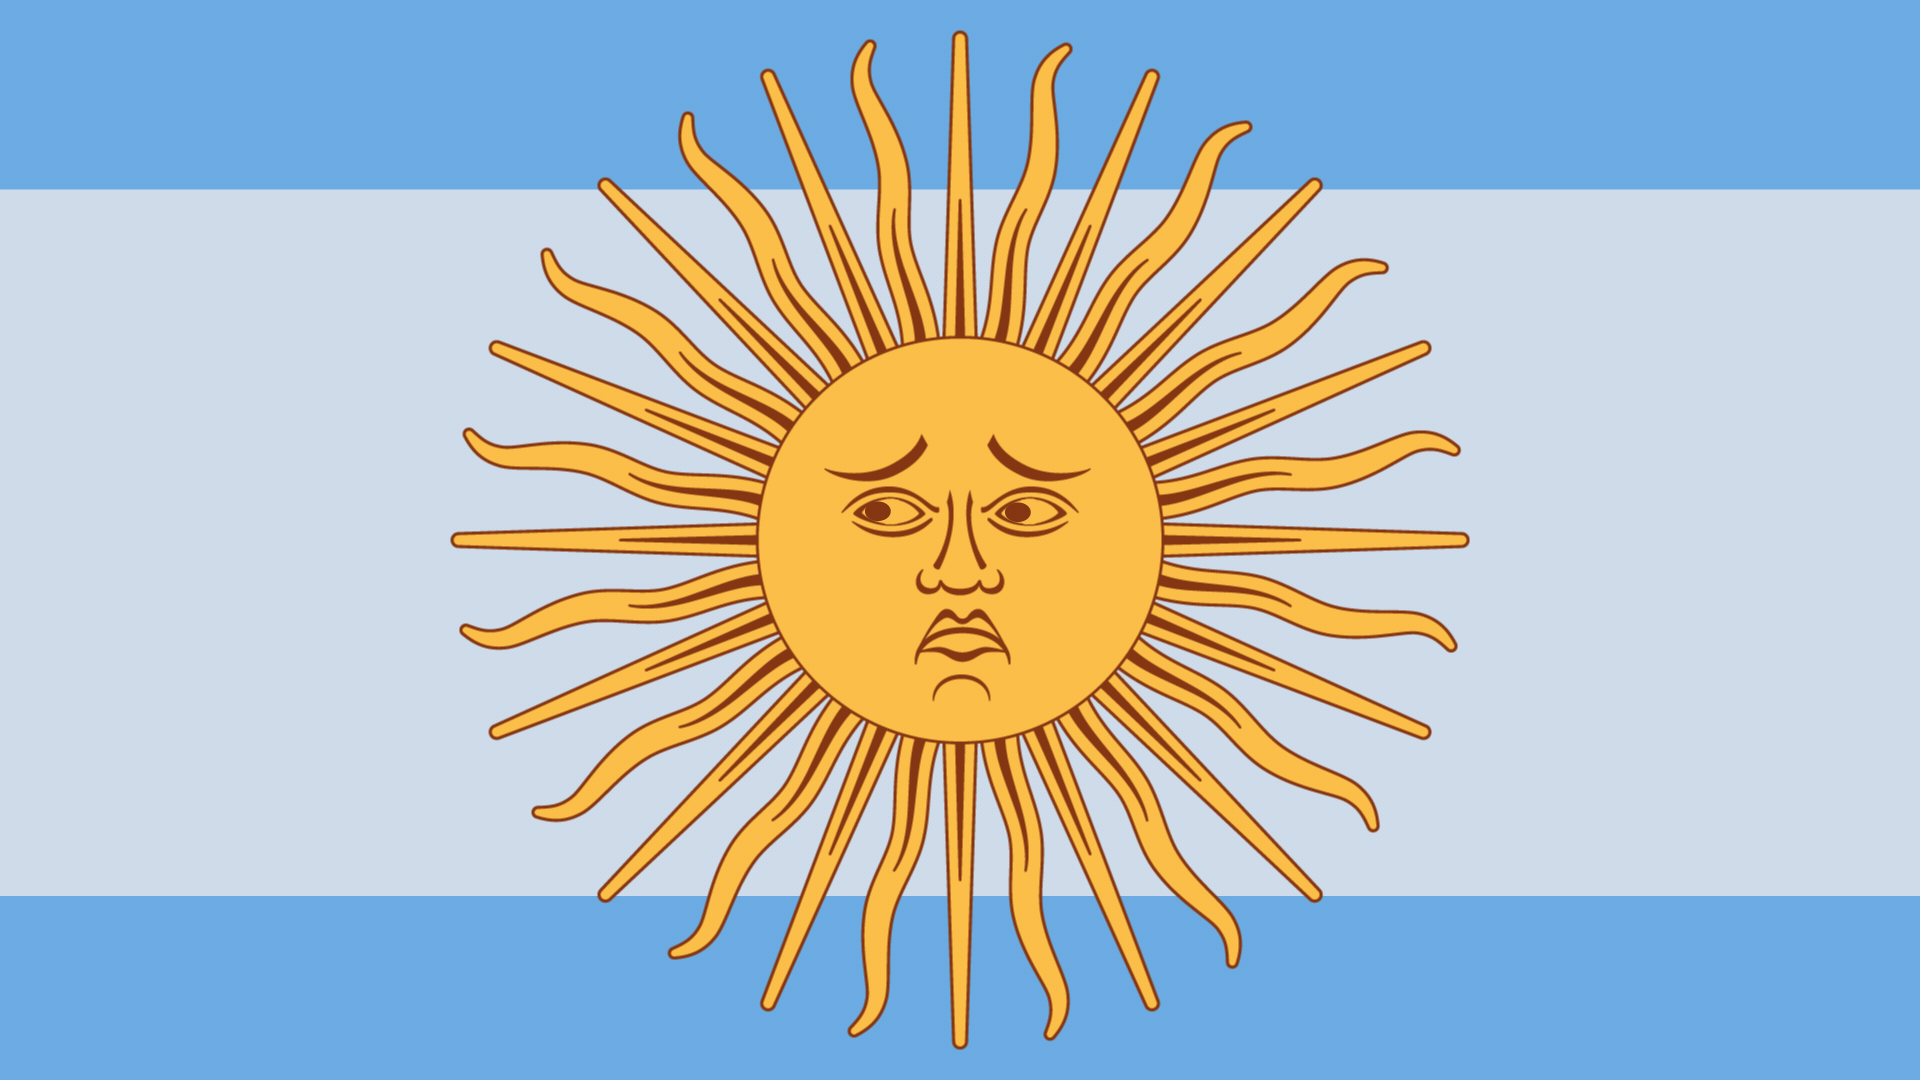 Animated illustration of the sun from Argentina's flag looking upset.